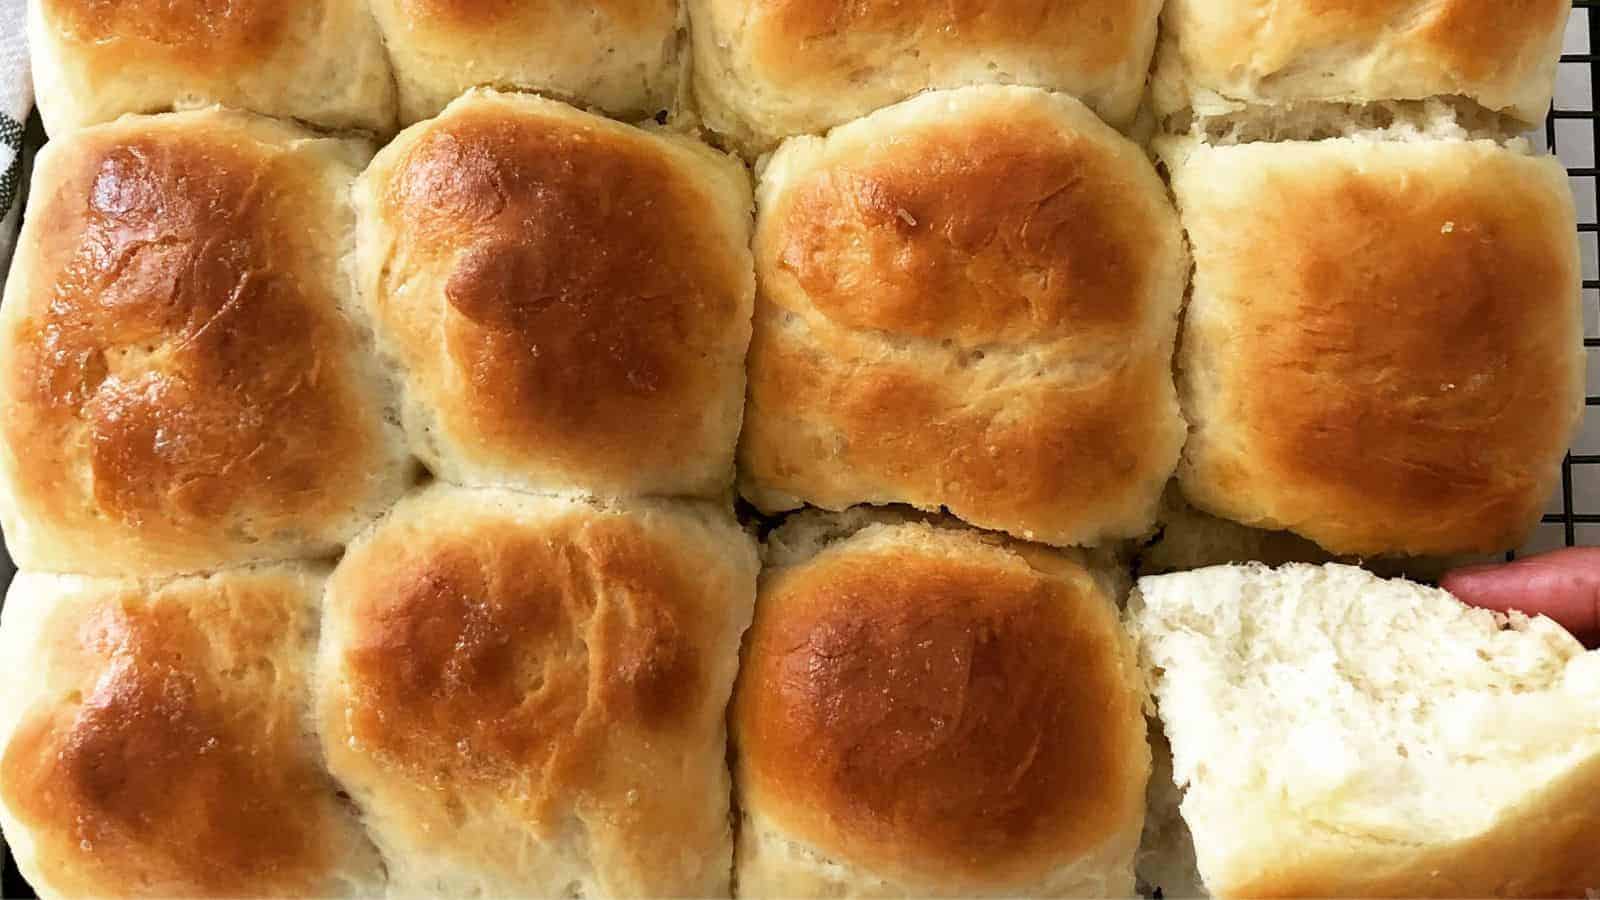 <p>As far as Indian recipes you need to try, Ladi Pav is essential. These fluffy buns are staple accompaniments for many dishes like Pav Bhaji. They’re wonderfully light and buttery, perfect for soaking up flavorful gravies. Plus, they’re surprisingly simple to make at home.<br><strong>Get the Recipe: </strong><a href="https://easyindiancookbook.com/ladi-pav/?utm_source=msn&utm_medium=page&utm_campaign=msn">Ladi Pav</a></p>